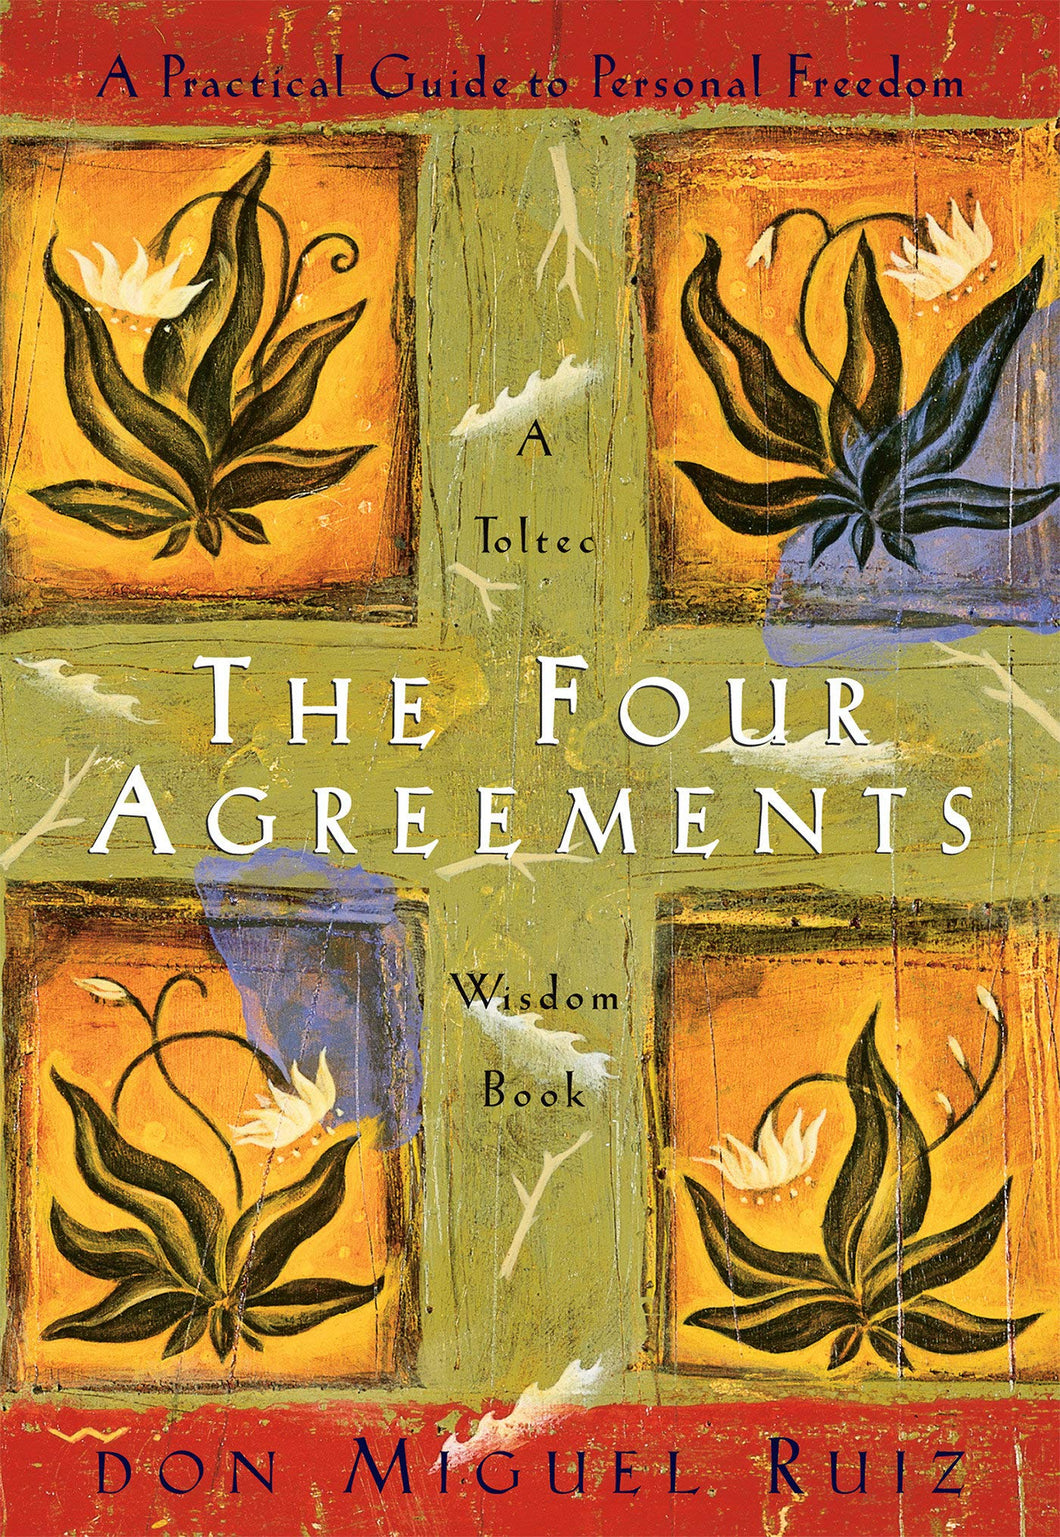 The Four Agreements [Don Miguel Ruiz]